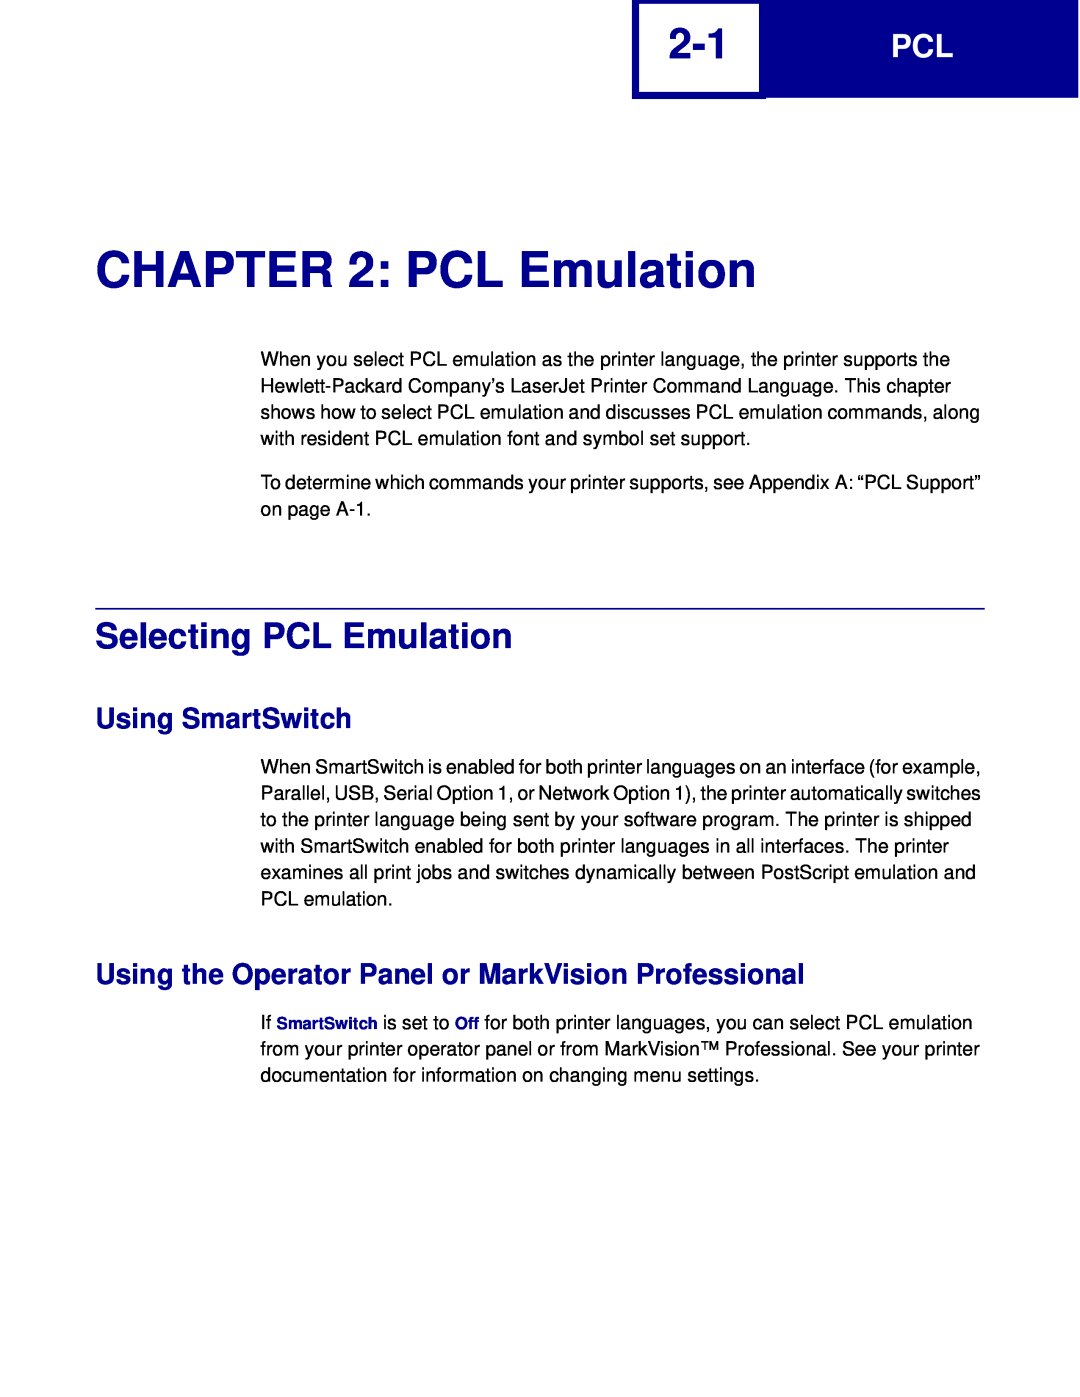 Lexmark C762, C760 Selecting PCL Emulation, Using SmartSwitch, Using the Operator Panel or MarkVision Professional 